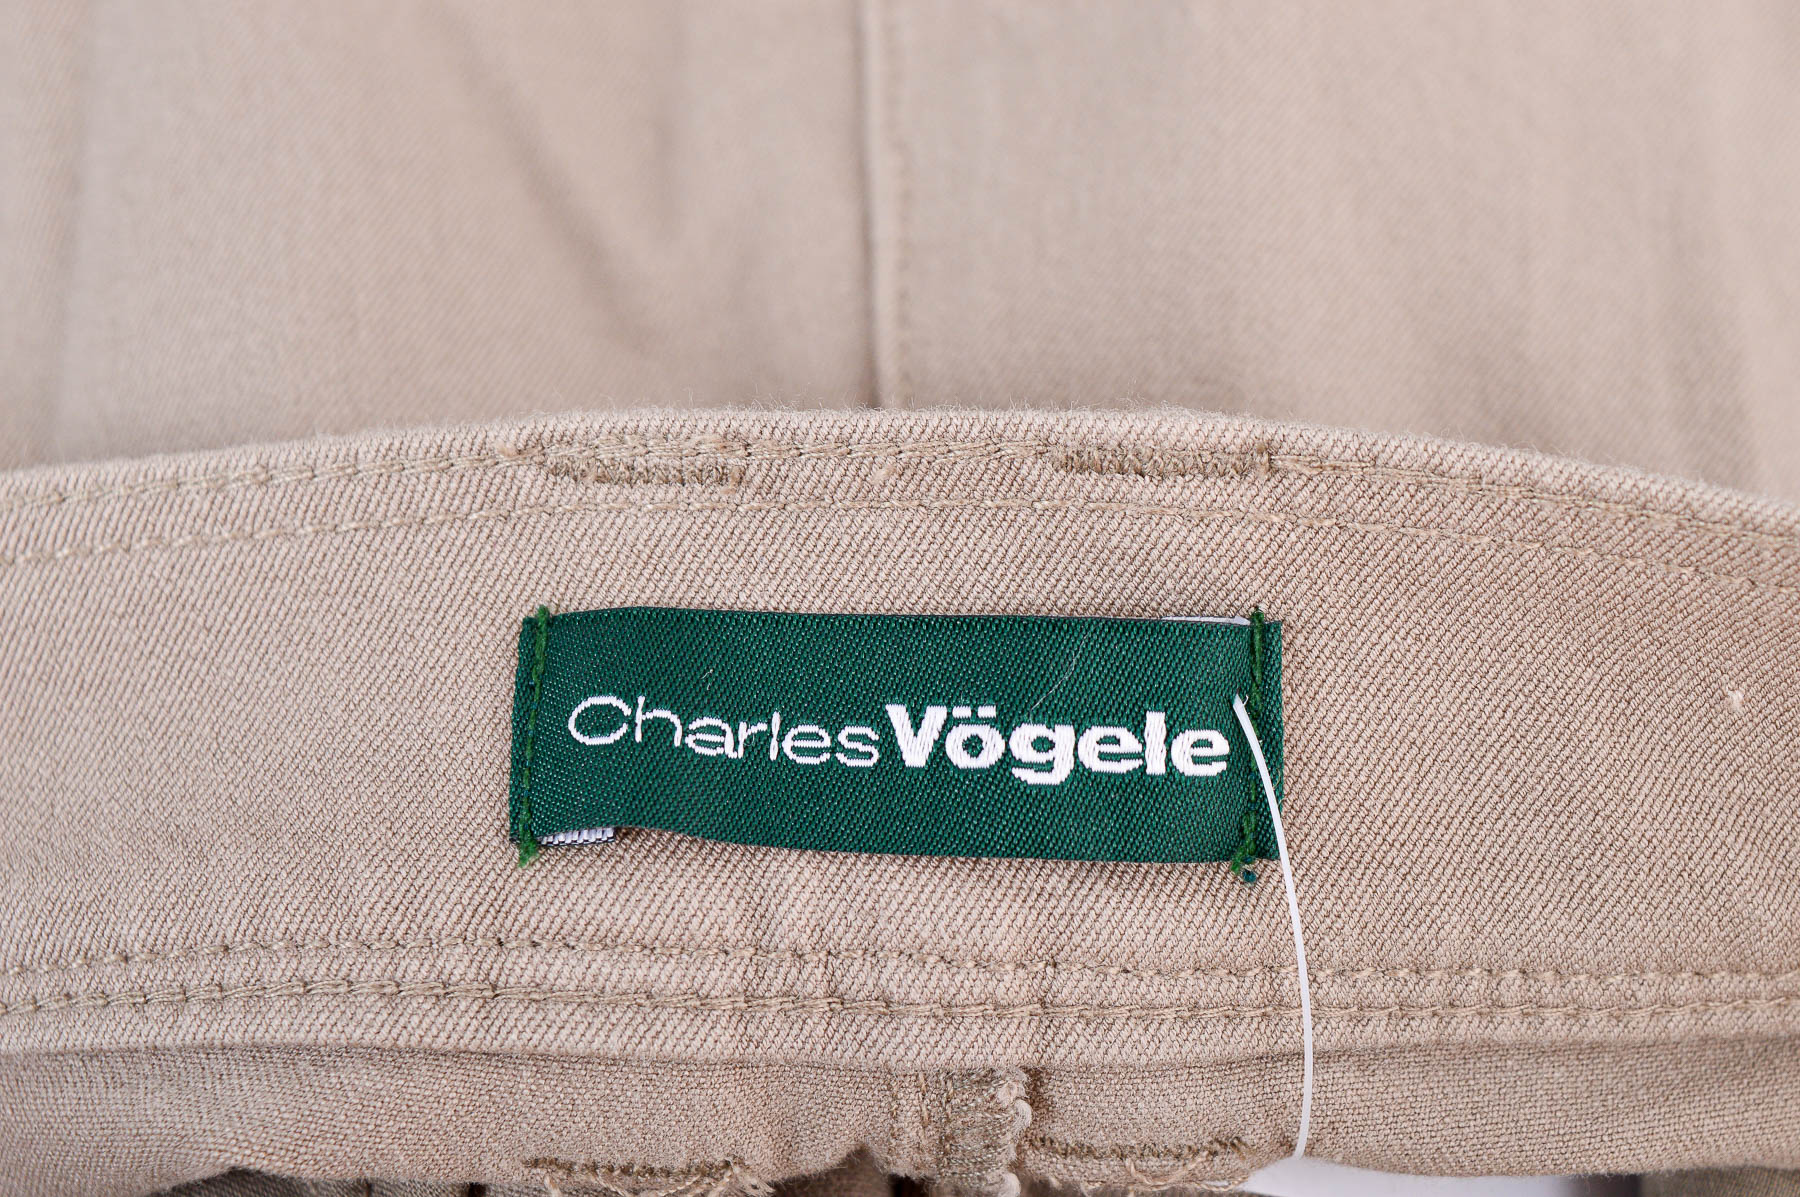 Women's trousers - Charles Vogele - 2